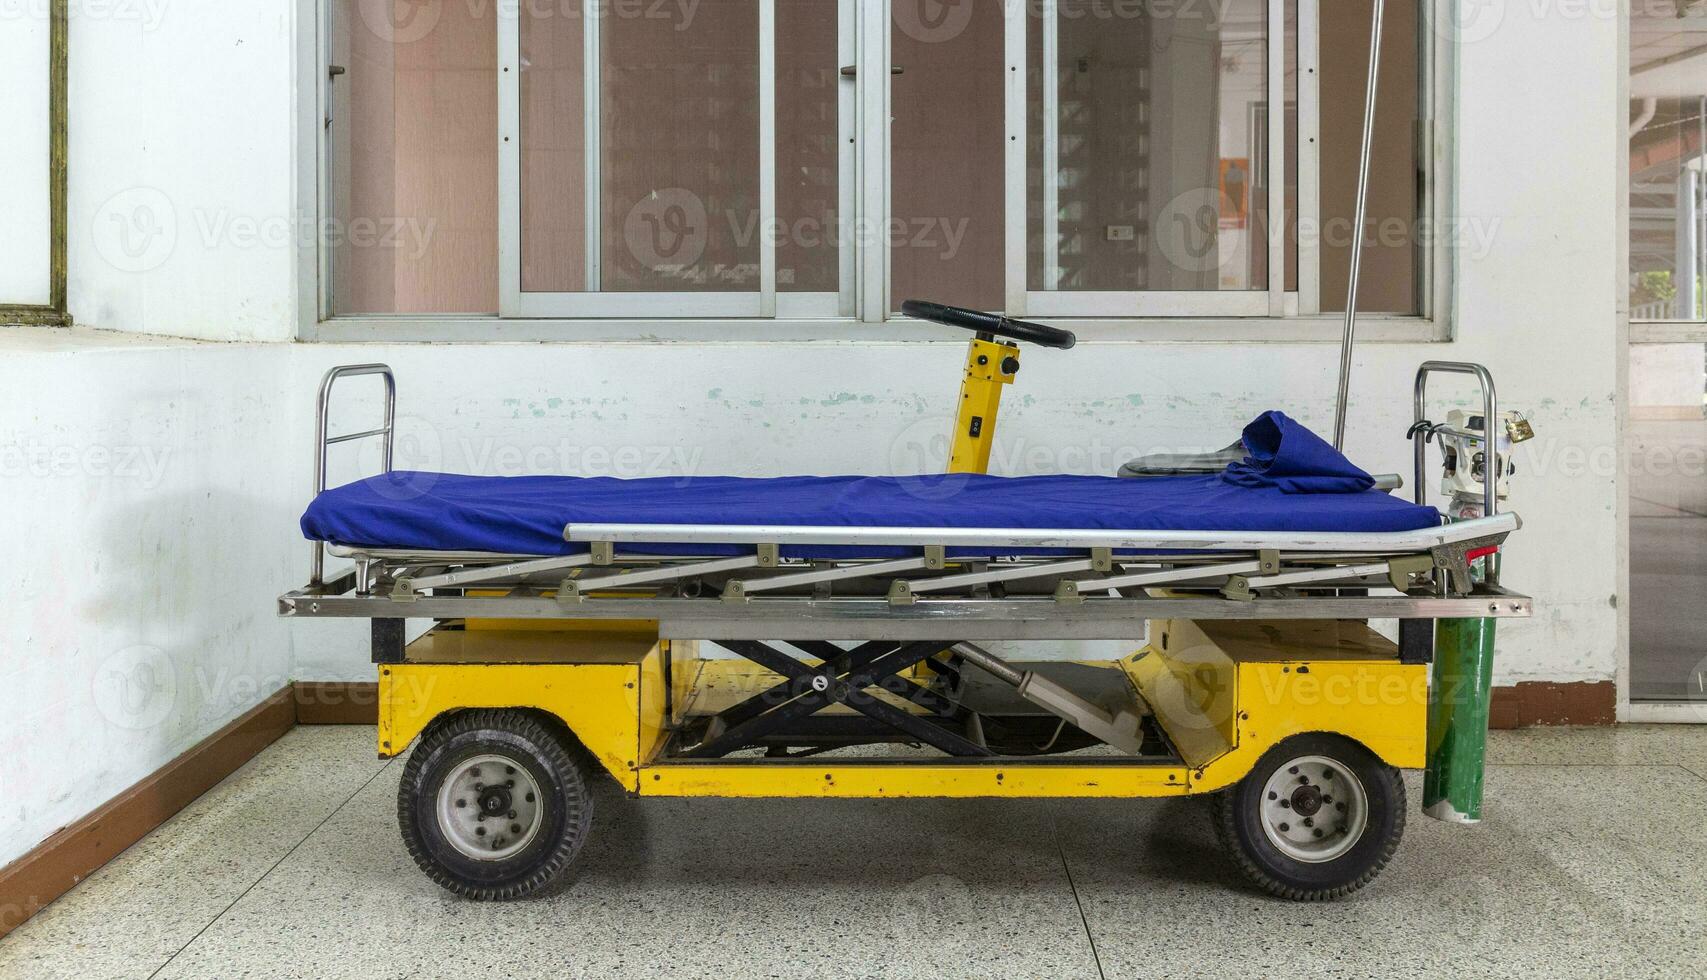 Wheelchair EV, equipped with bed and oxygen tank for transporting patients within the hospital building photo